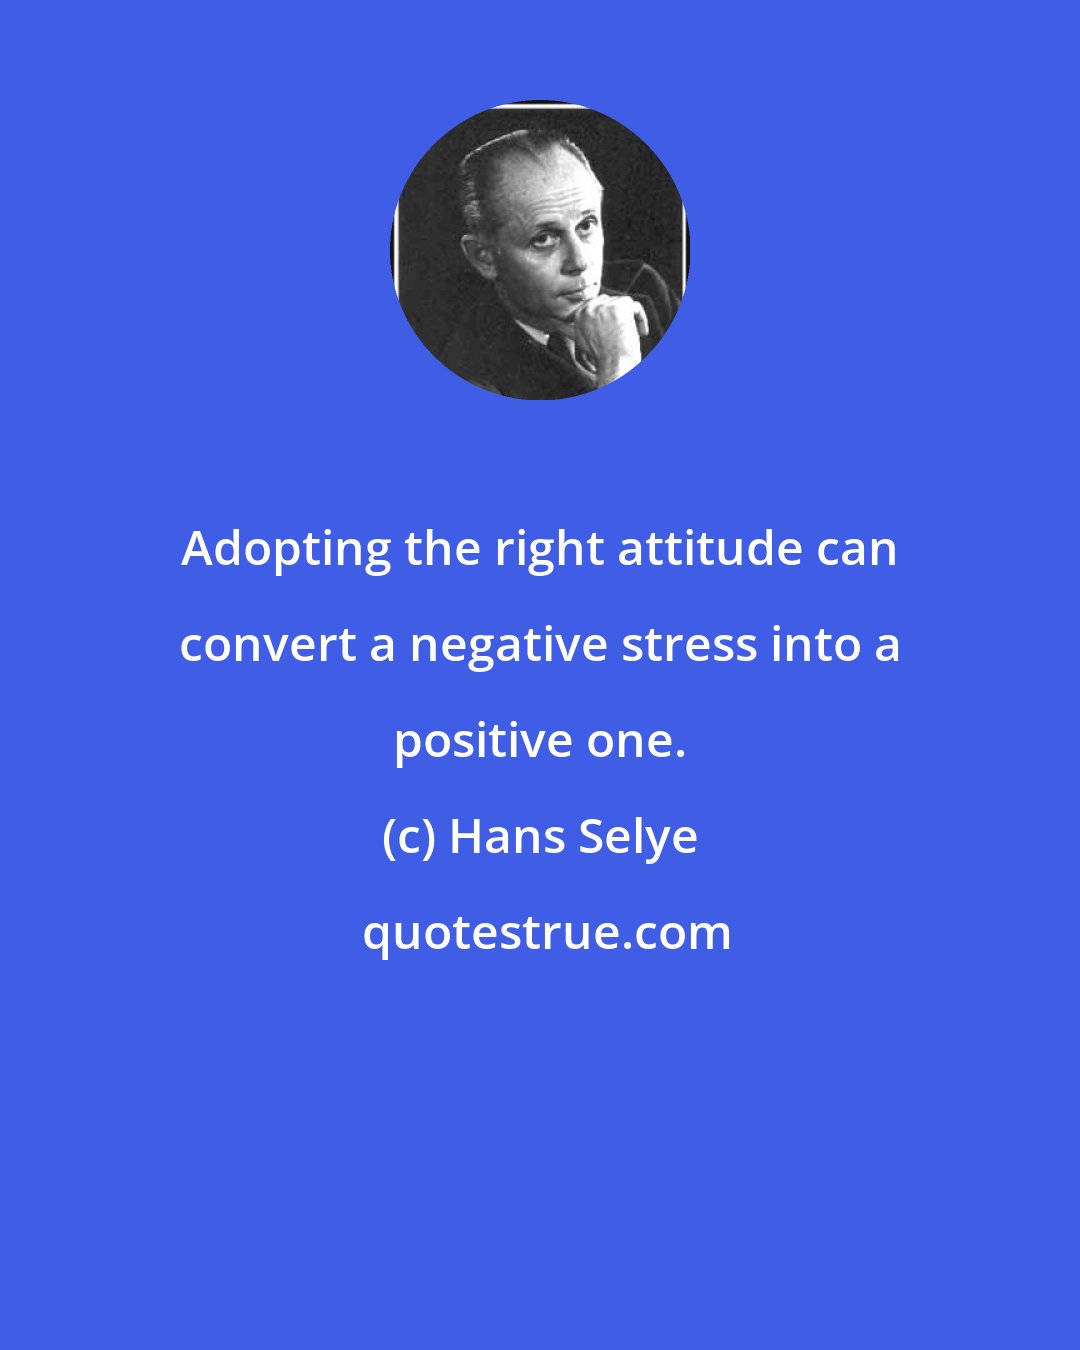 Hans Selye: Adopting the right attitude can convert a negative stress into a positive one.